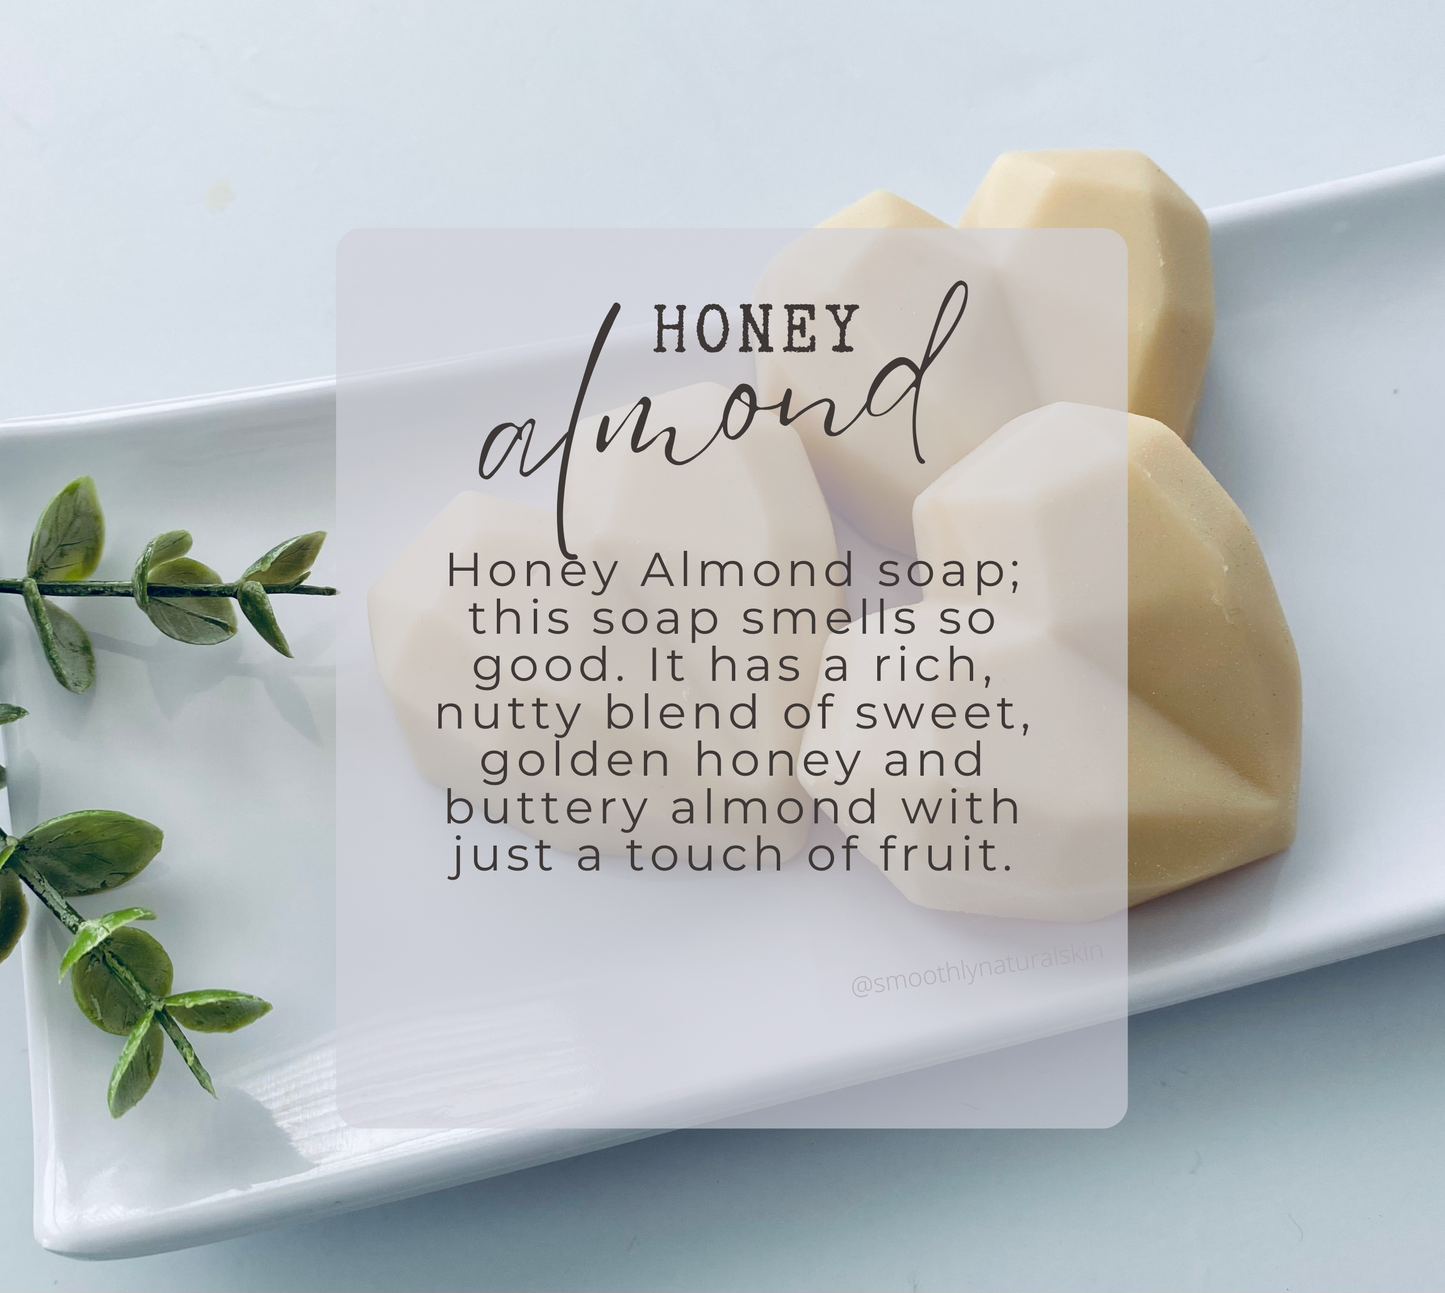 Honey Almond soap; this soap smells so good. It has a rich, nutty blend of sweet, golden honey and buttery almond with just a touch of fruit.